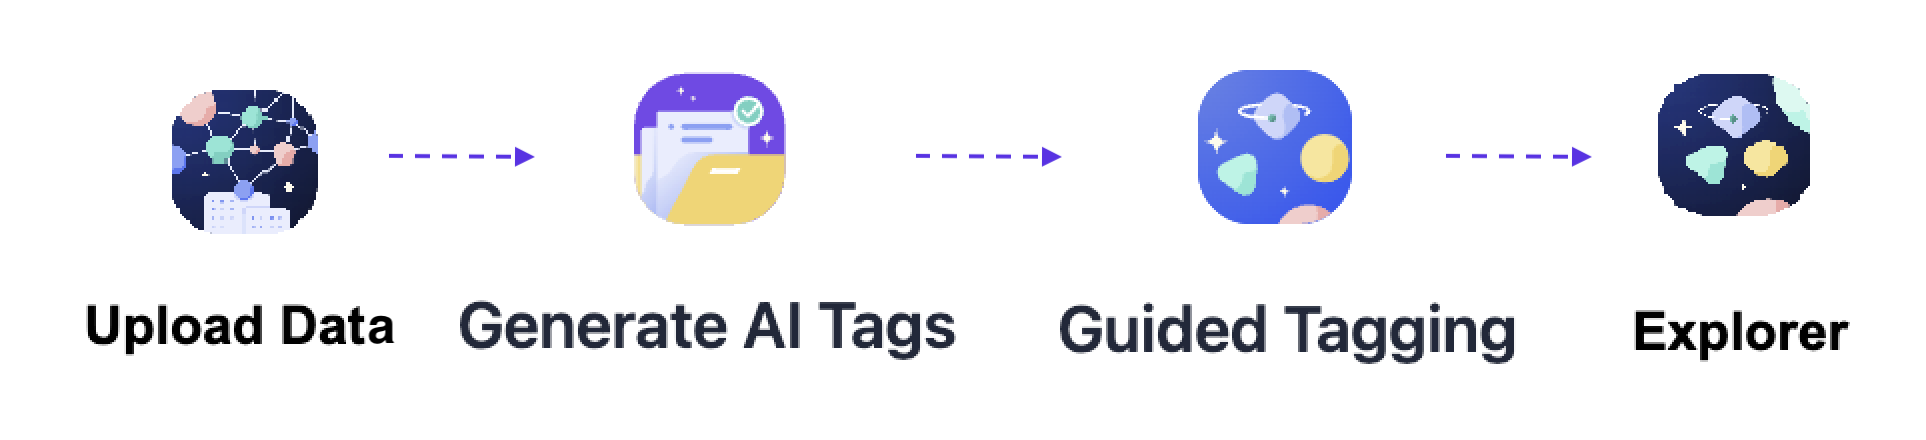 Relevance AI - Tagging flow